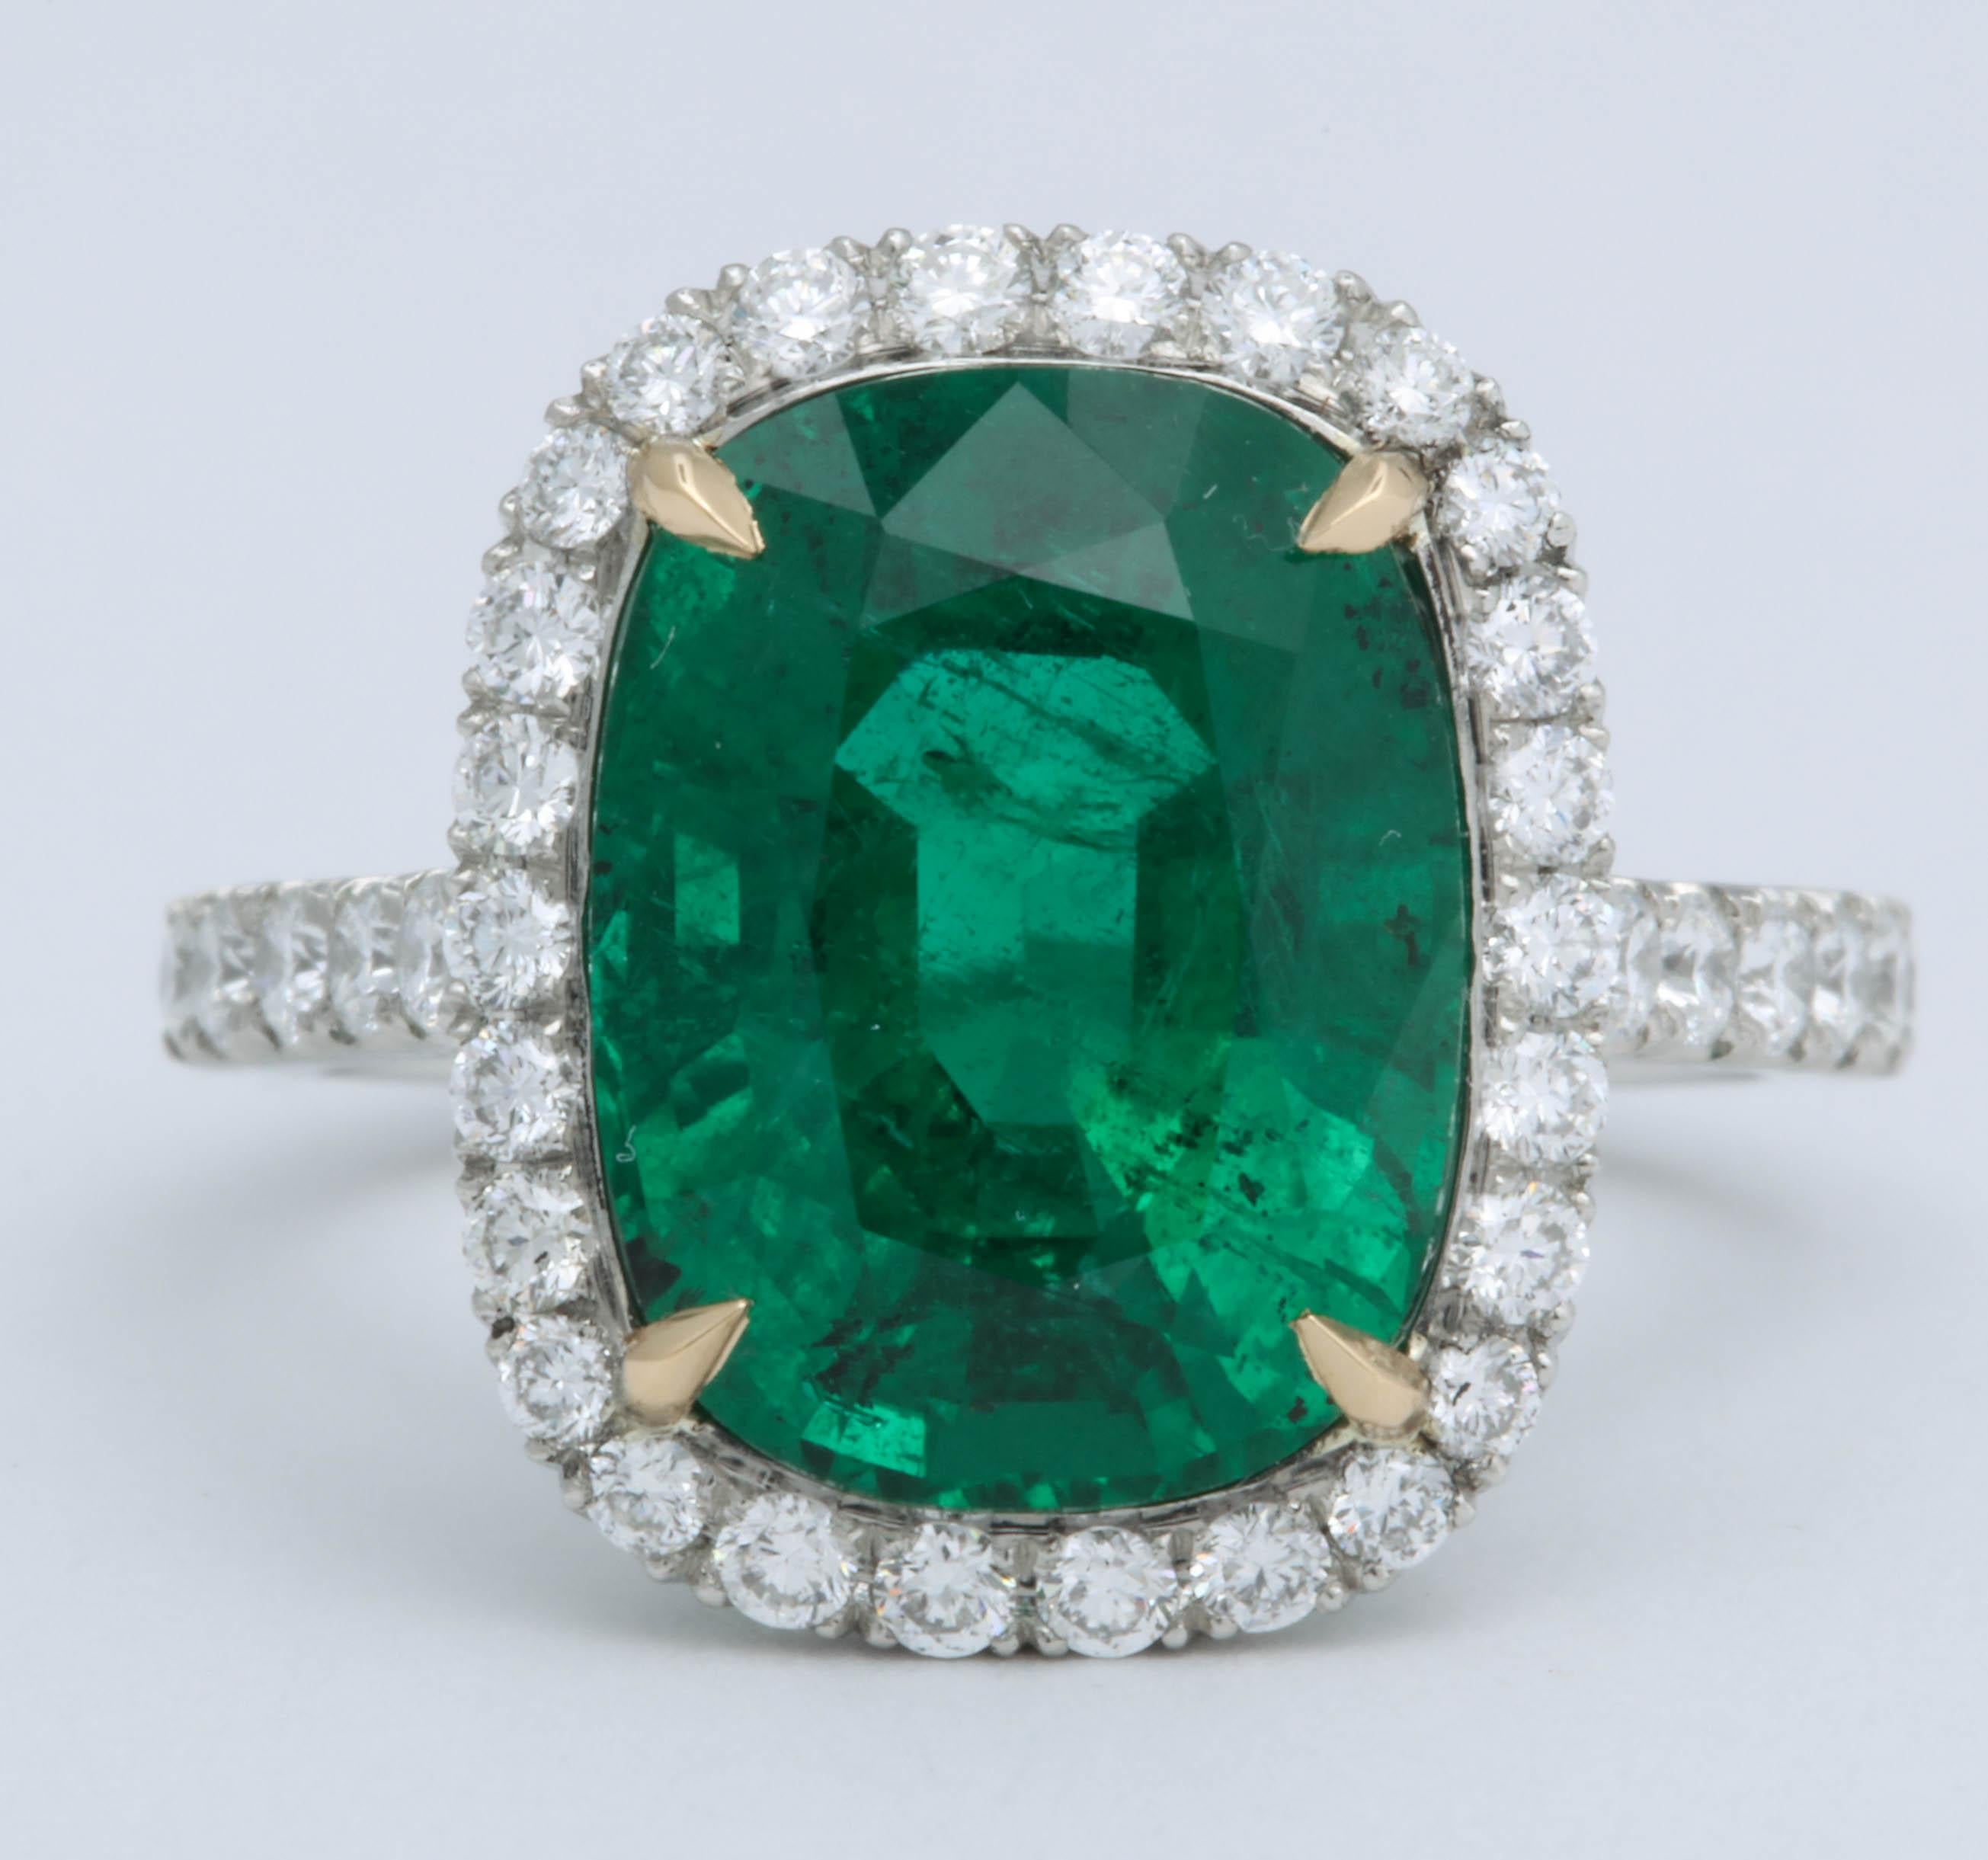 
A beautiful Green Emerald cut in an elongated cushion shape!!

5.21 carat cushion cut emerald with ZERO treatment -- NO OIL as stated on the GIA certificate. 

This completely natural beauty is set in an 18k yellow gold and platinum diamond setting